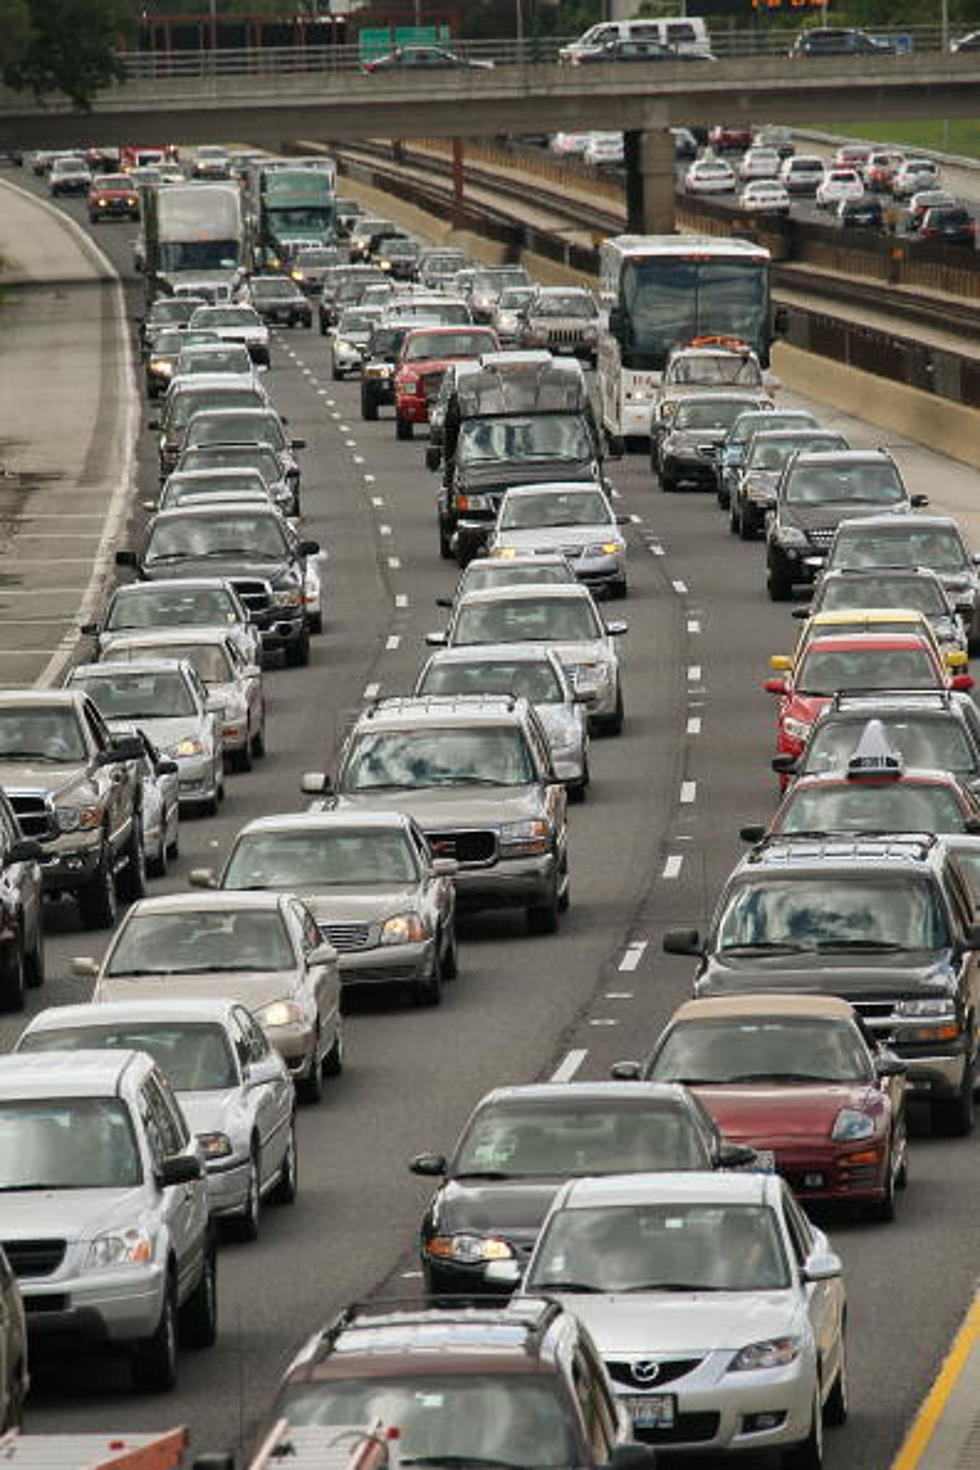 New York Has One of the Top 10 Most Hated Interstates in the U.S.